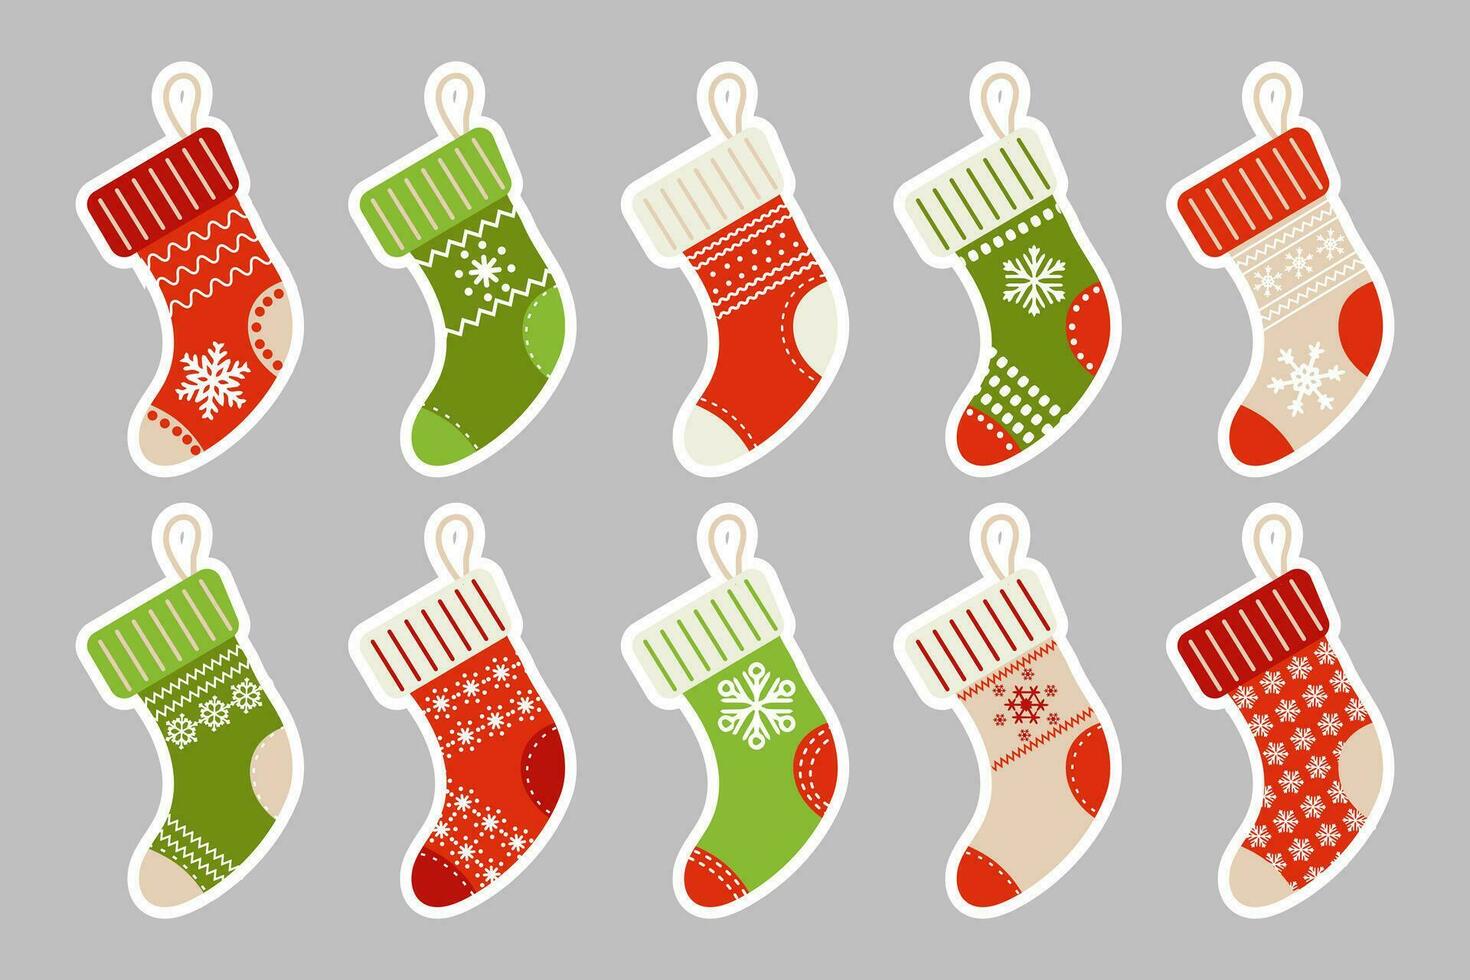 Winter Christmas socks with snowflake ornament, stikcers set. Icons, vector